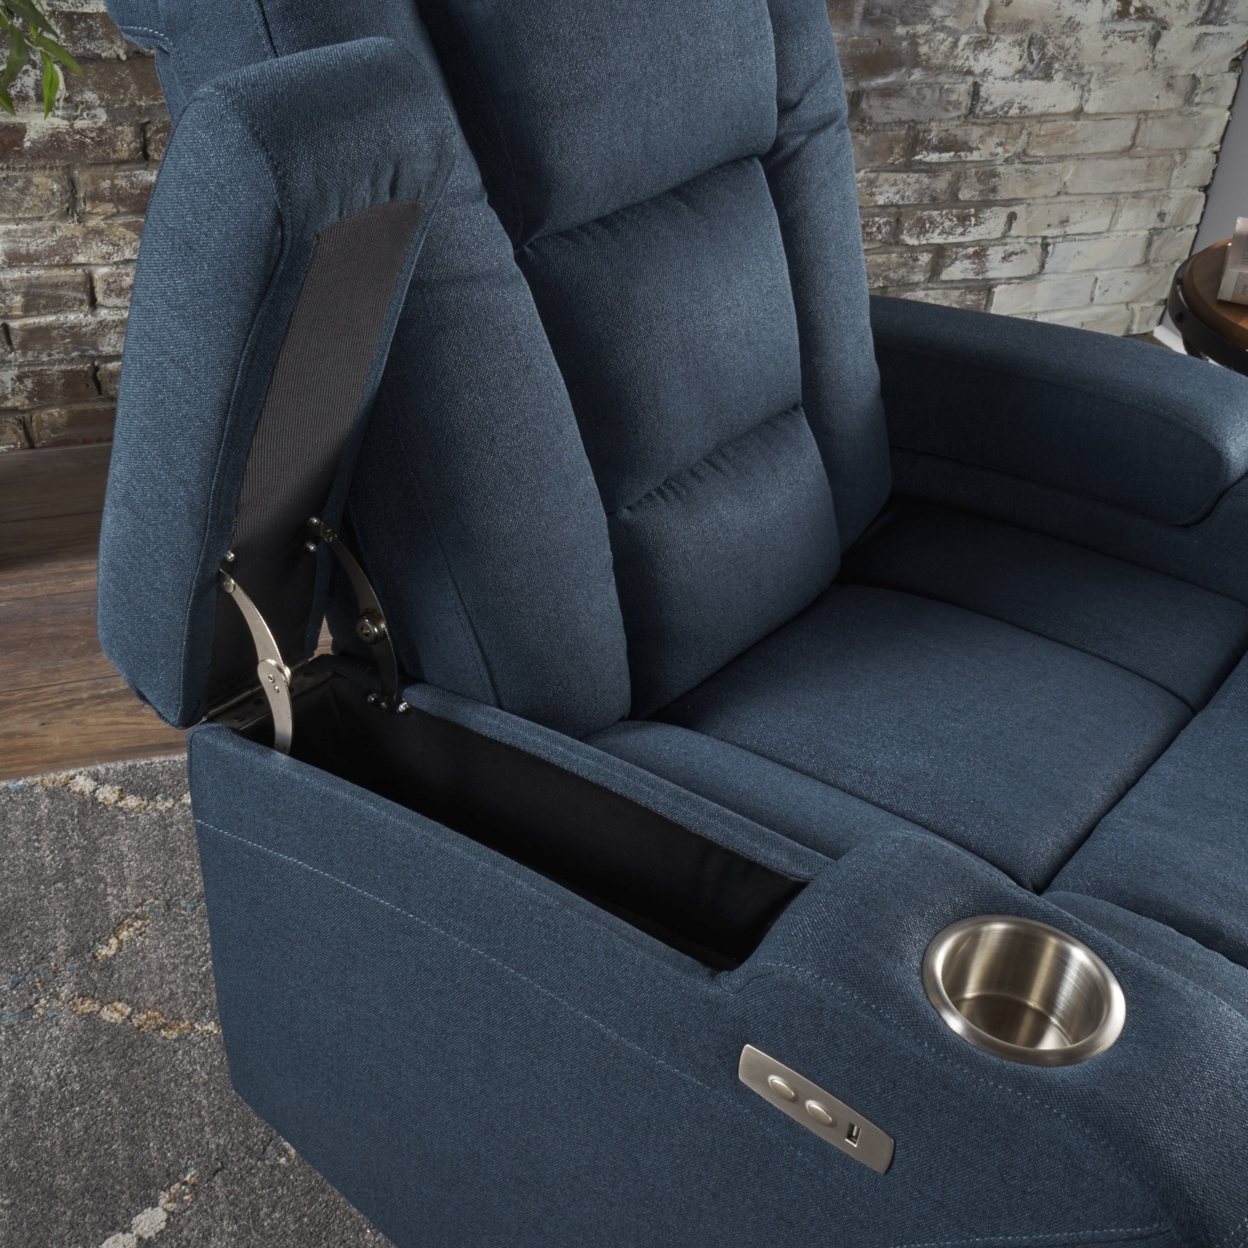 Everette Tufted Navy Blue Fabric Power Recliner With Arm Storage And USB Cord